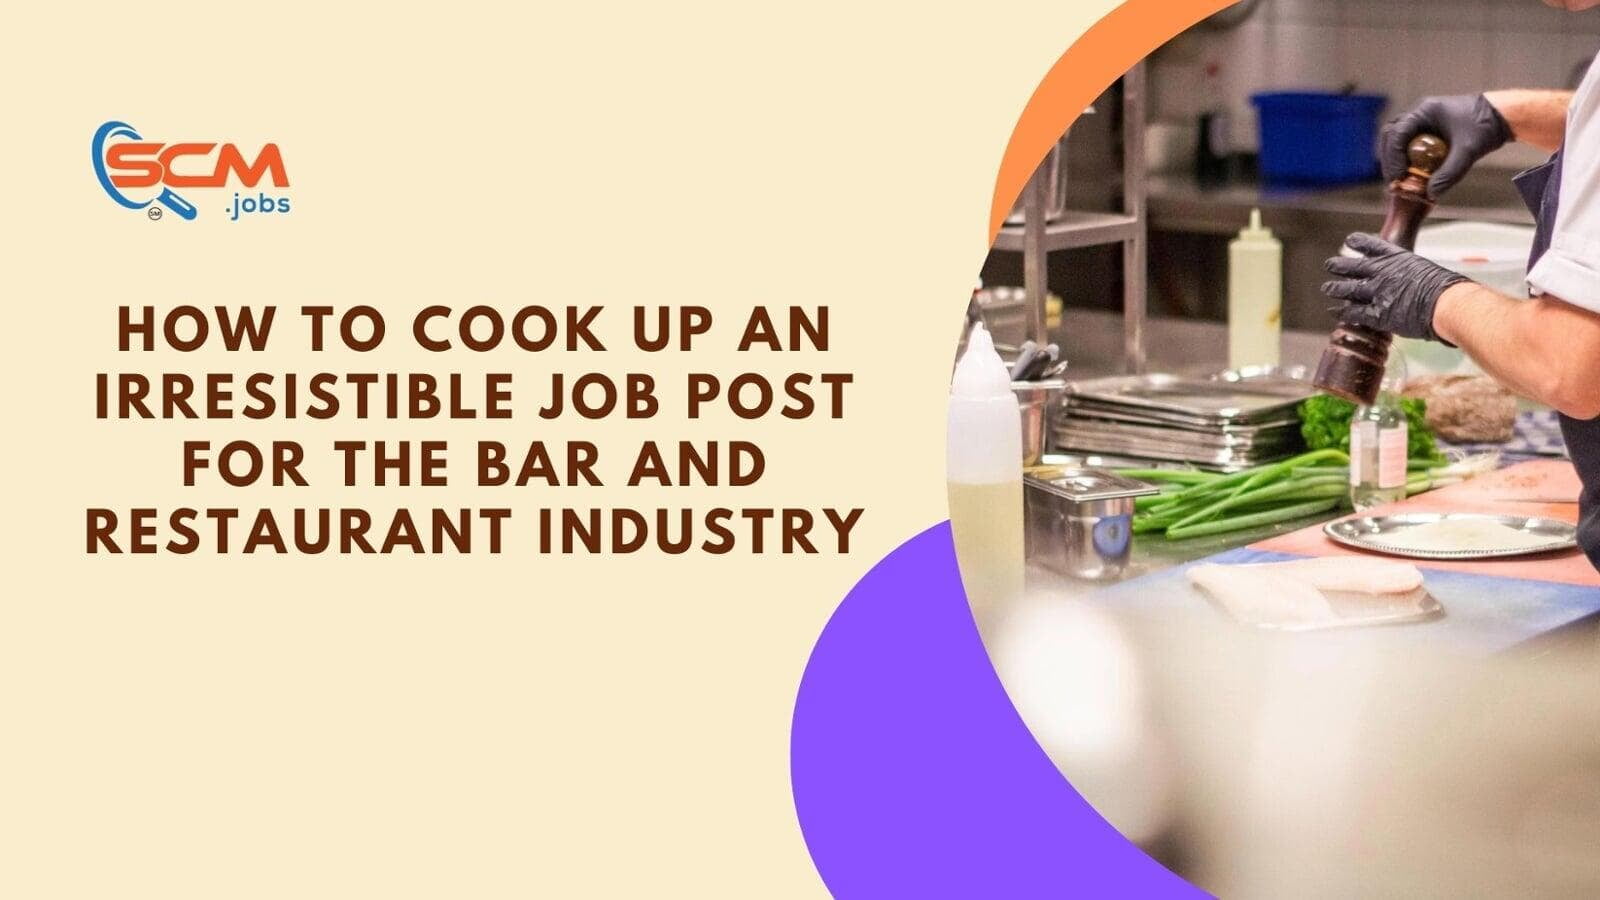 How to Cook Up an Irresistible Job Post for the Bar and Restaurant Industry